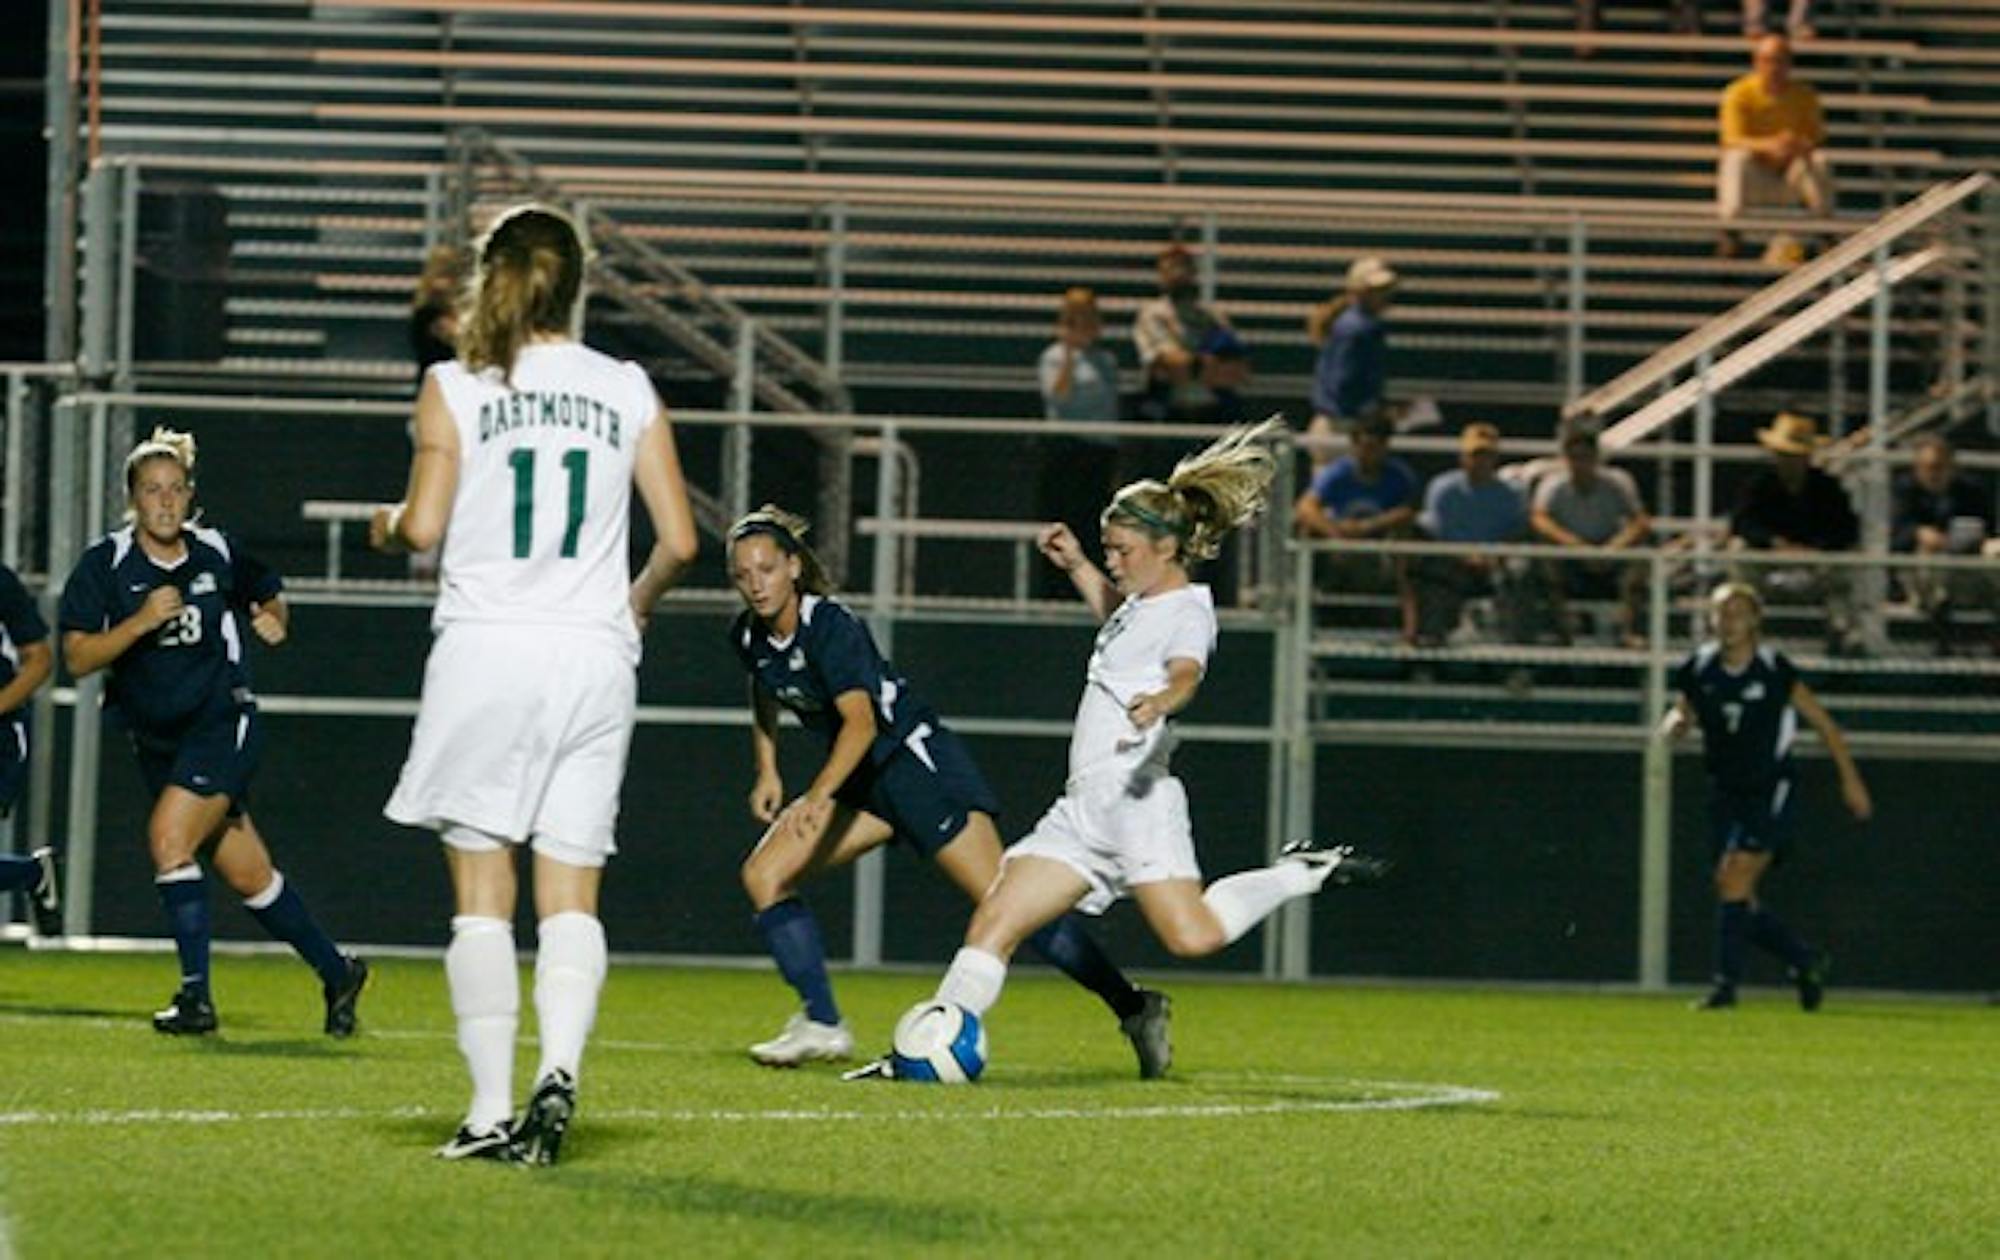 Big Green women's soccer has taken on some tough non-conference opponents in the early going.